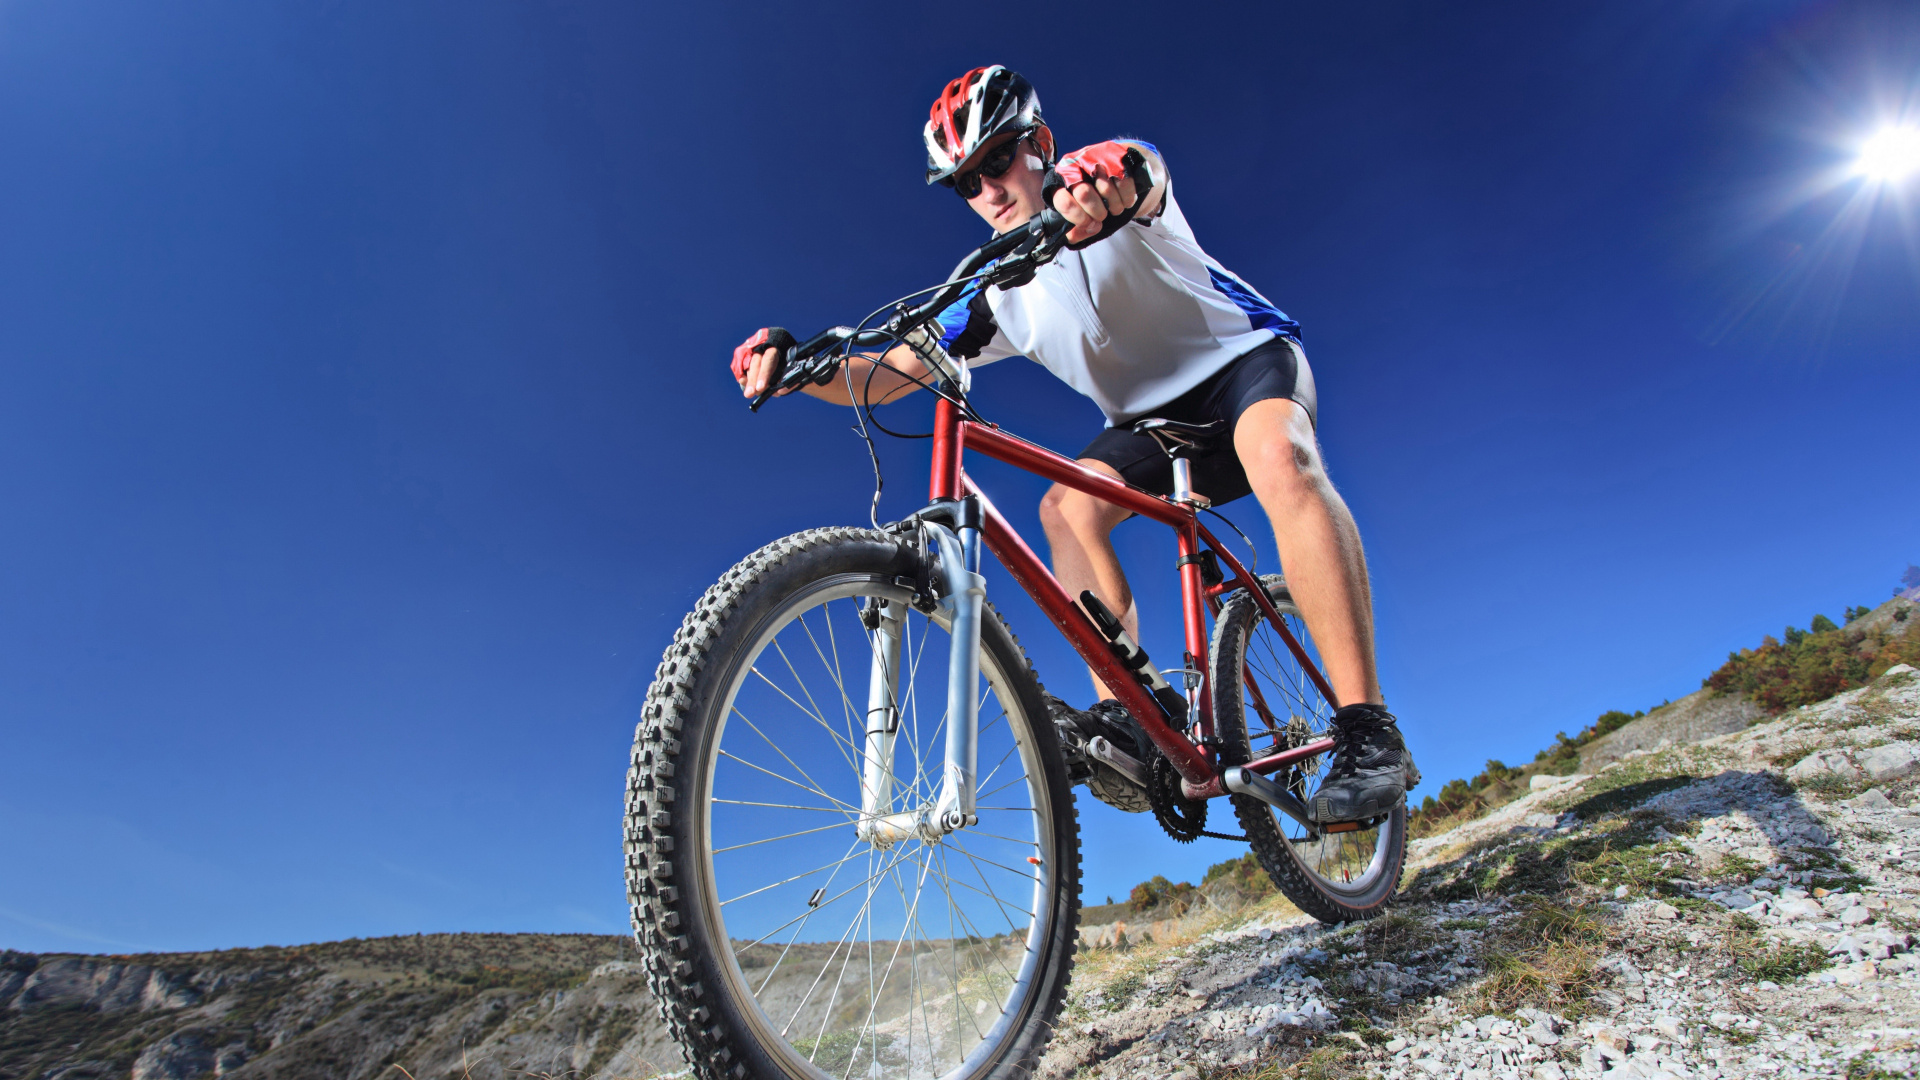 Man in White Shirt Riding on Red Mountain Bike During Daytime. Wallpaper in 1920x1080 Resolution